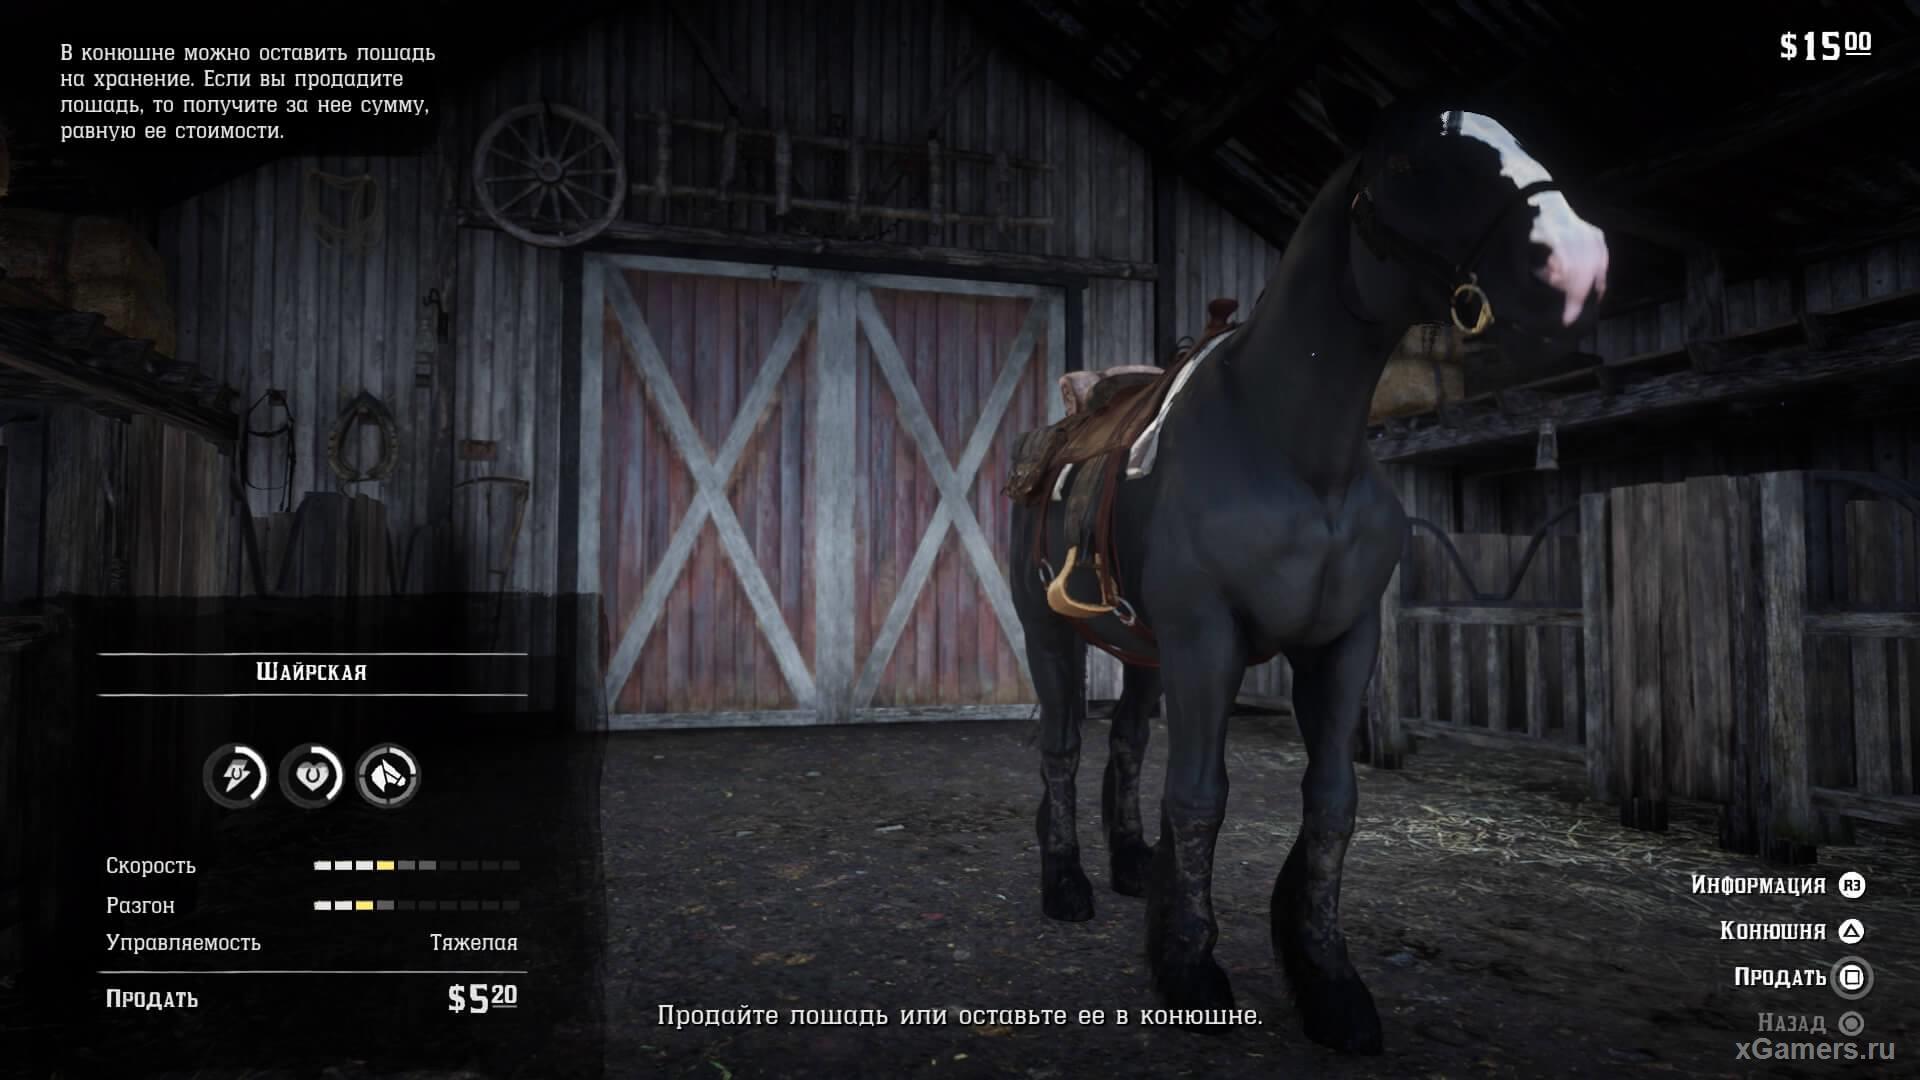 Breed horse - Suffolk, Sheirs in the game RDR 2